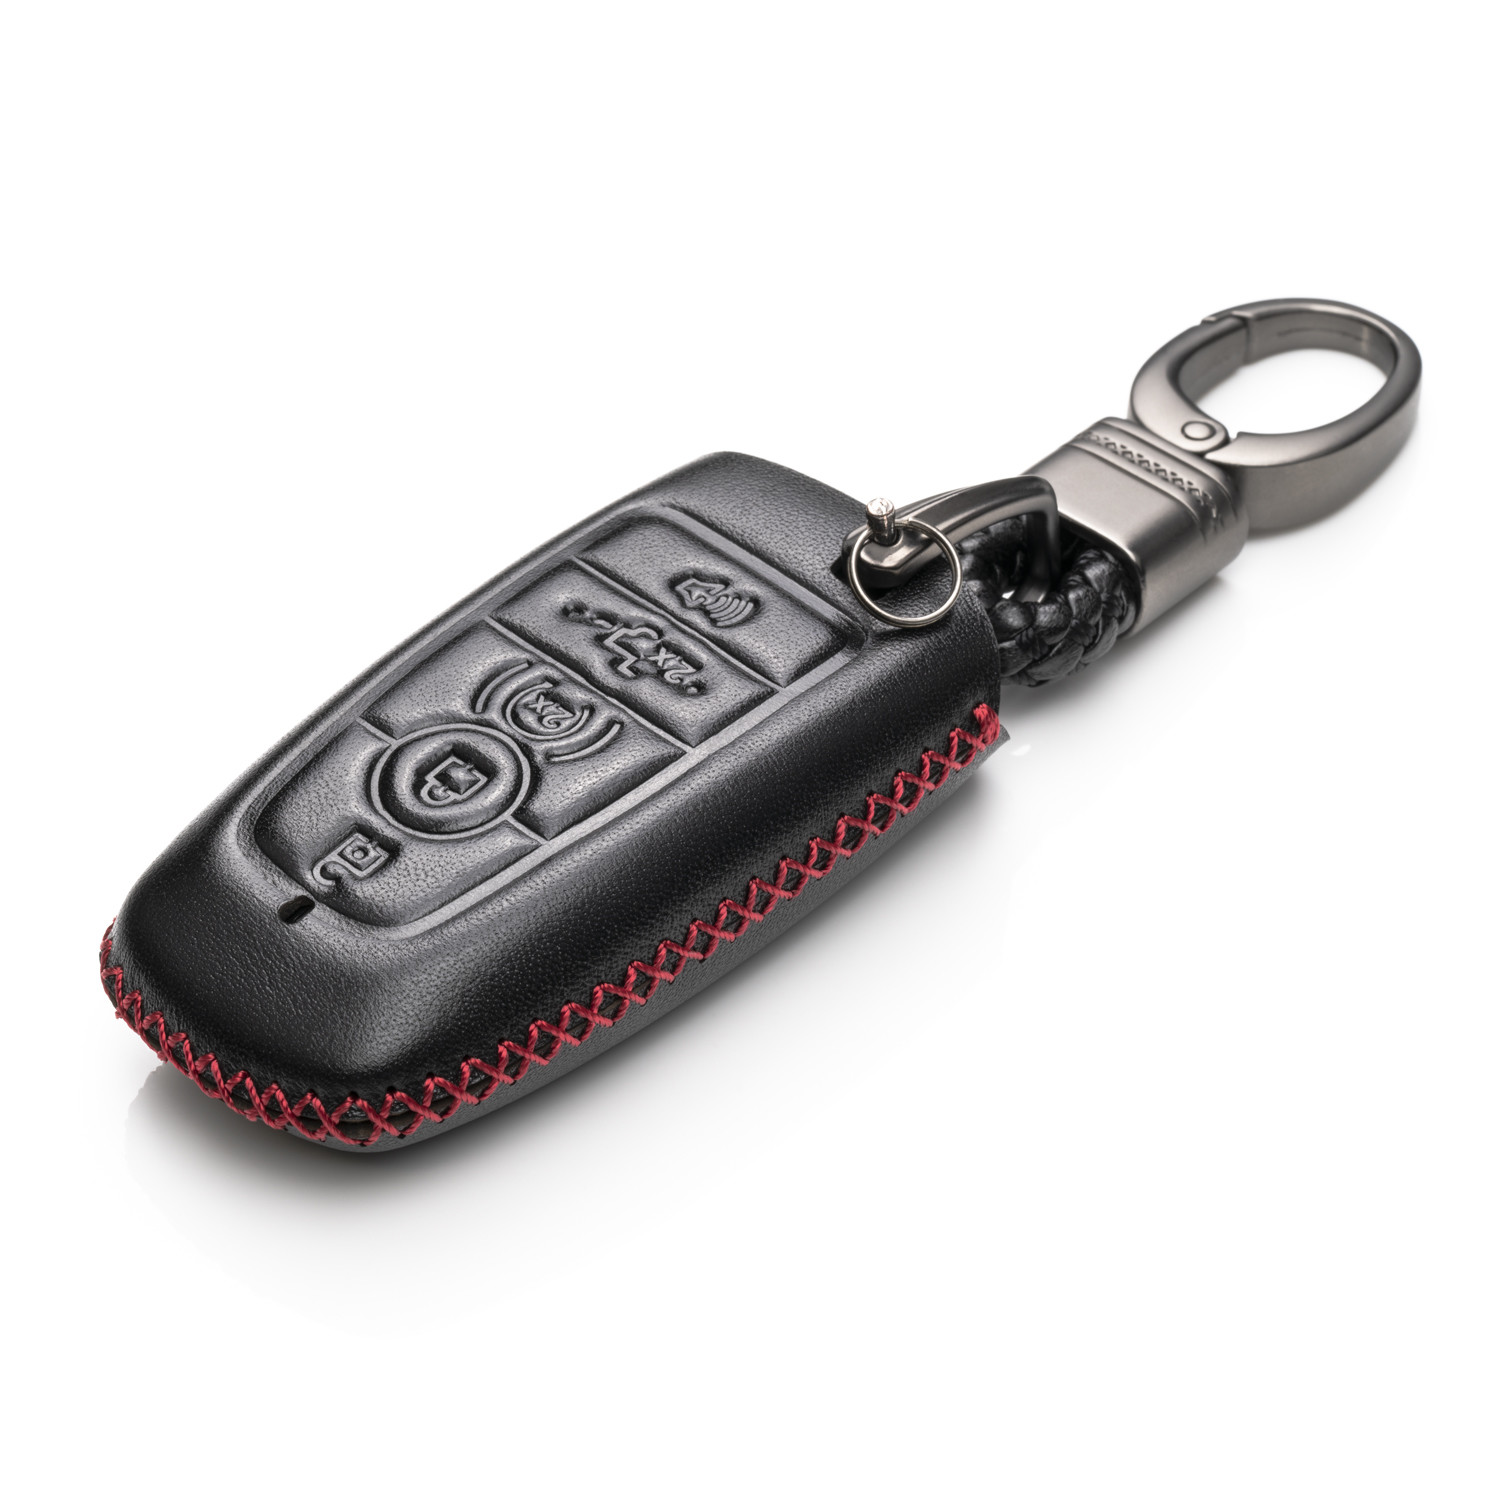 Vitodeco Genuine Leather Keyless Entry Remote Control Smart Key Case Cover with Leather Key Chain for Tesla Model S Red Model 3 